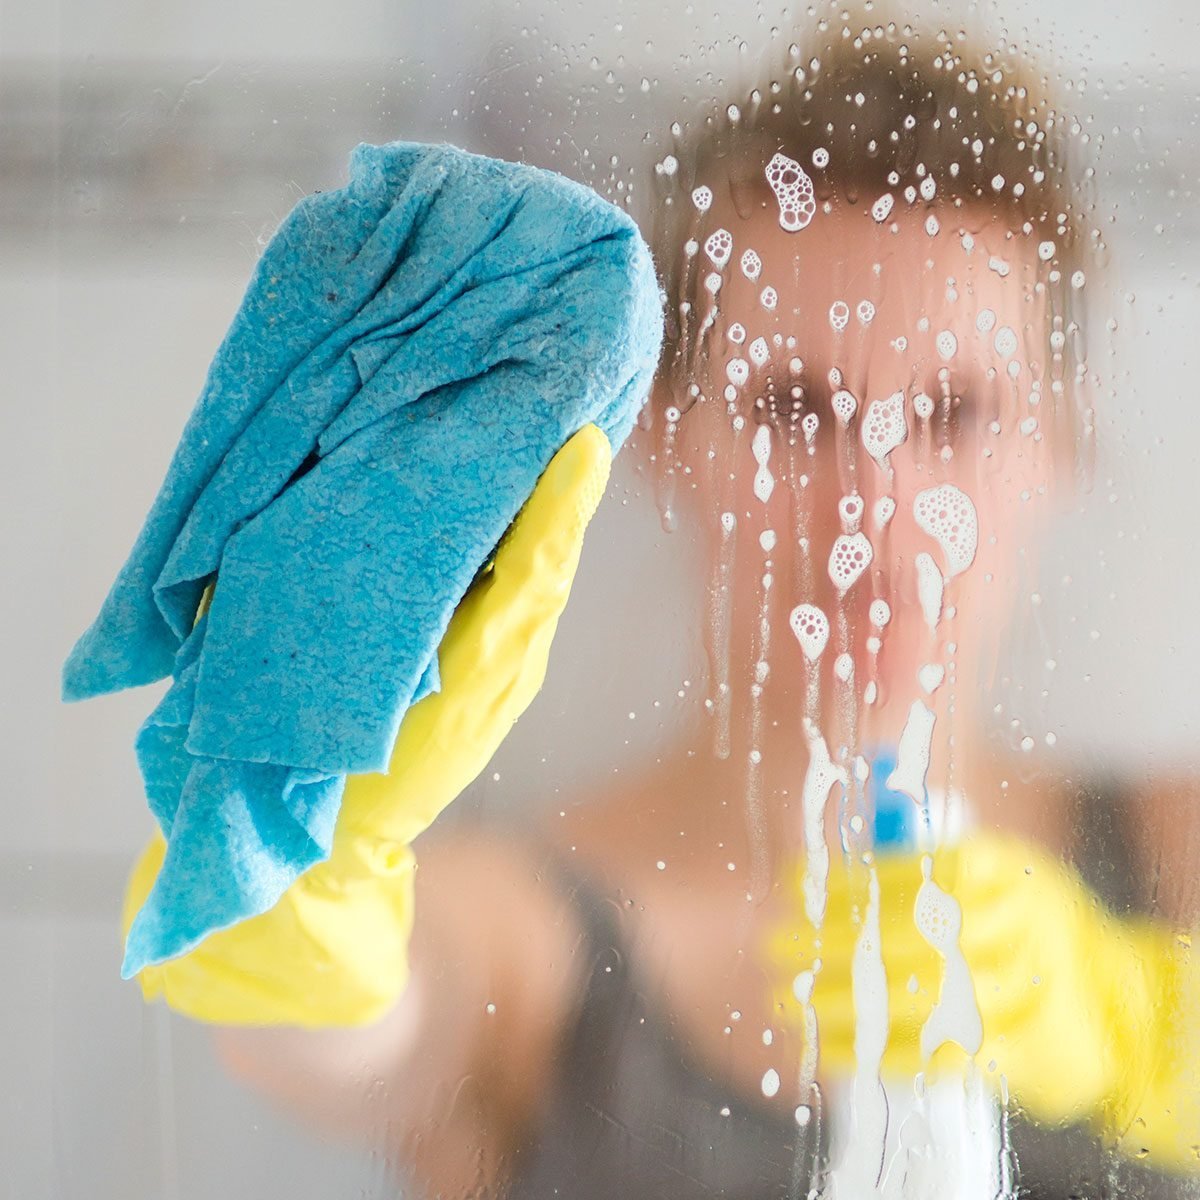 How To Clean Glass Shower Doors Without Chemicals